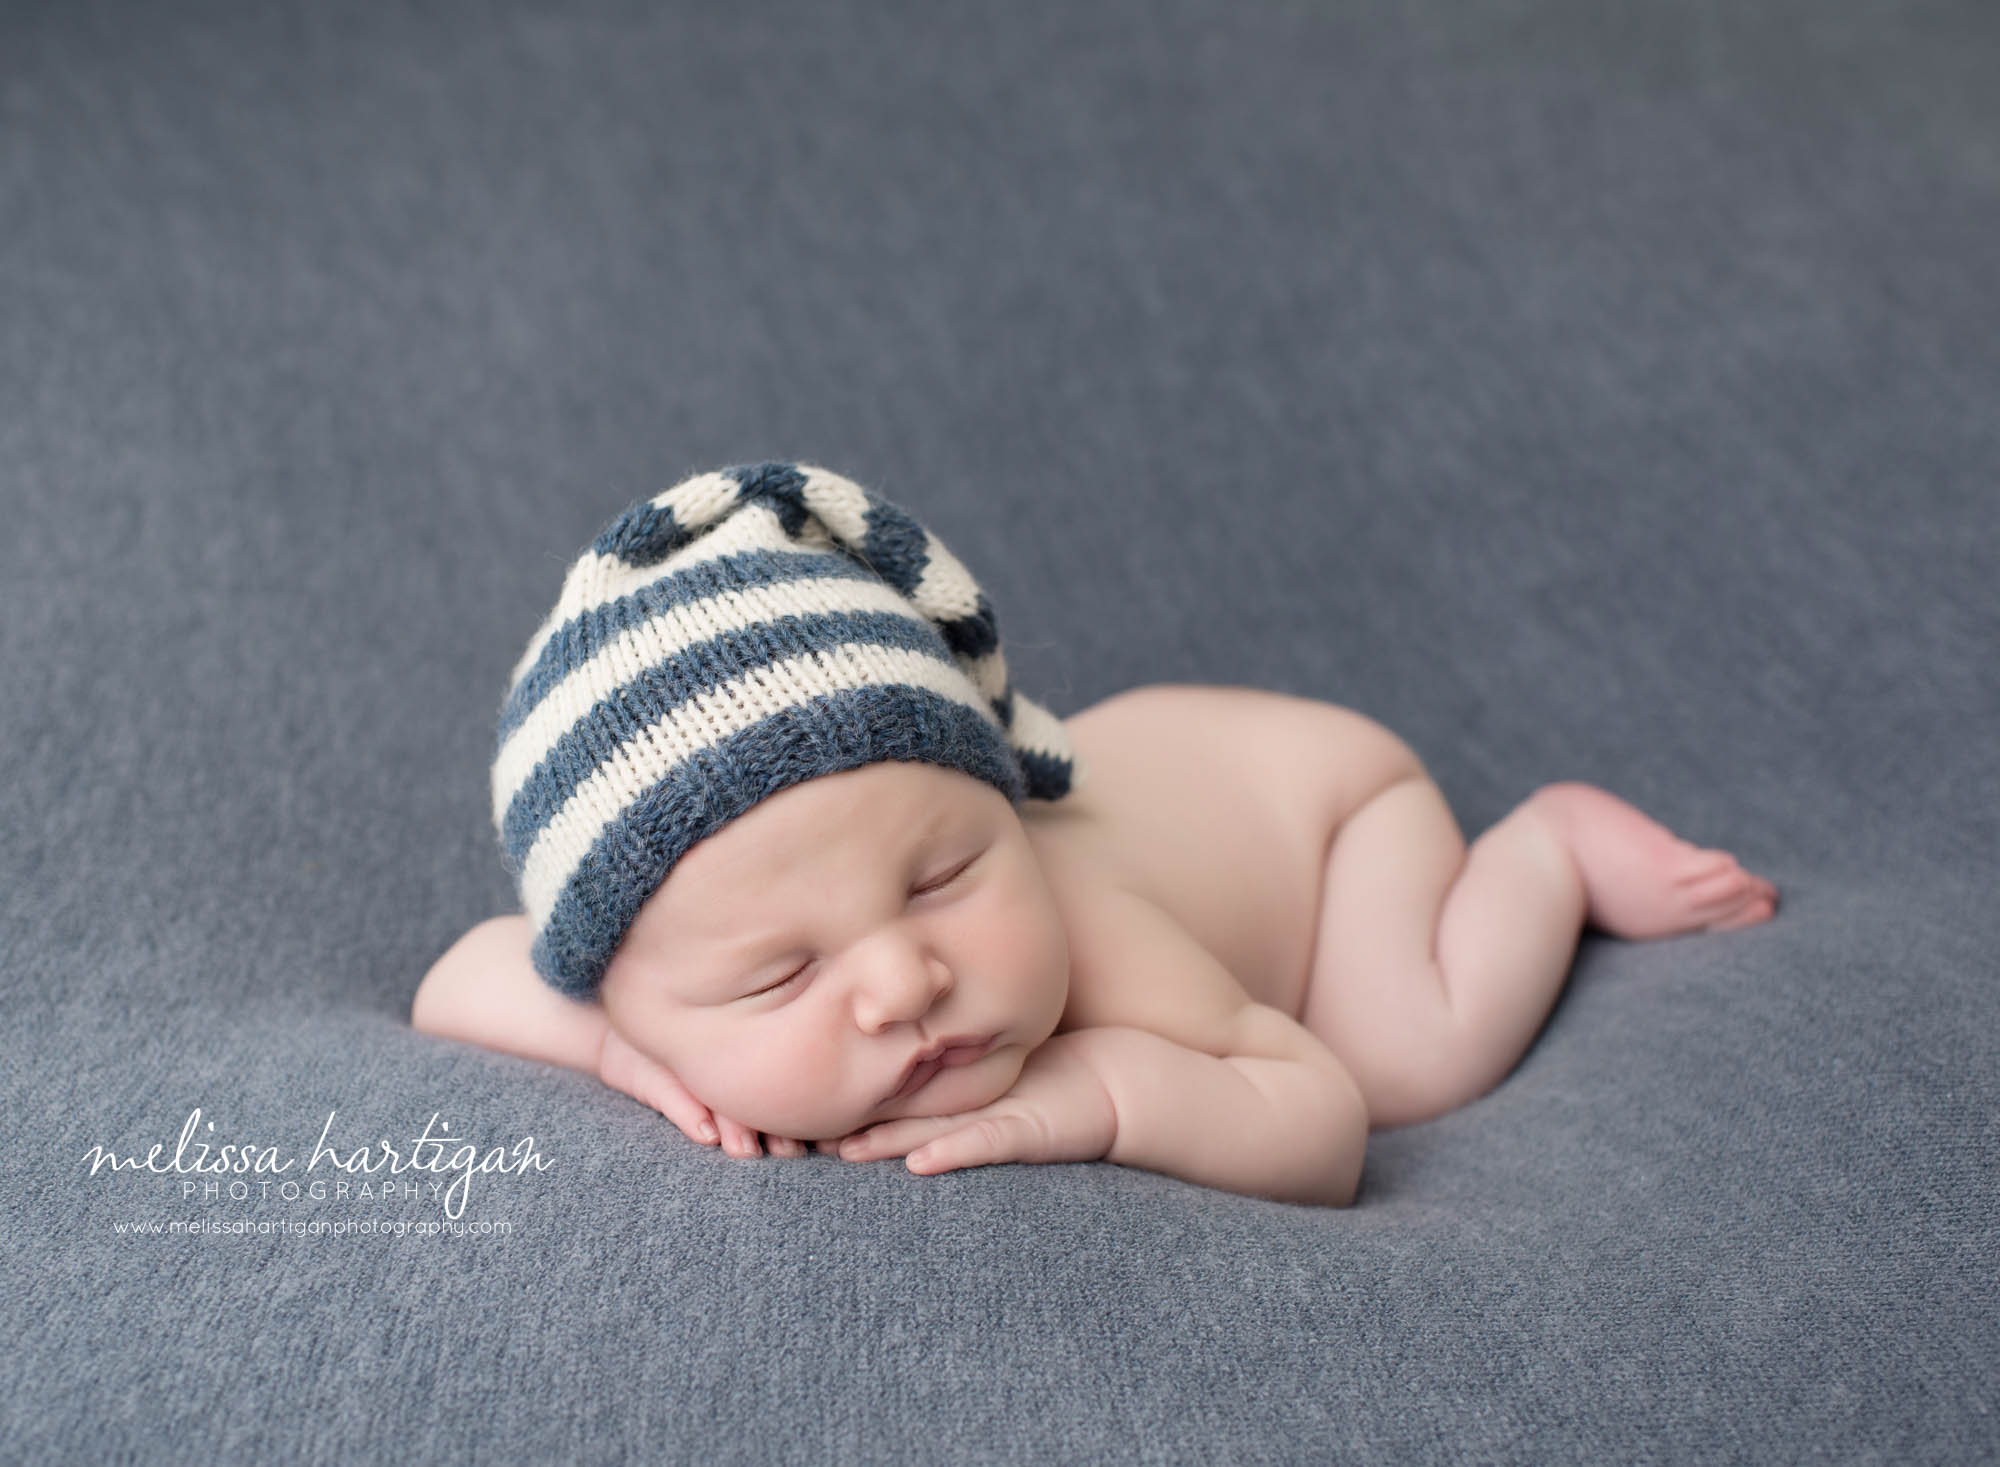 baby boy posed on tummy with hand under cheek and chin wearing striped cream and blue knitted hat